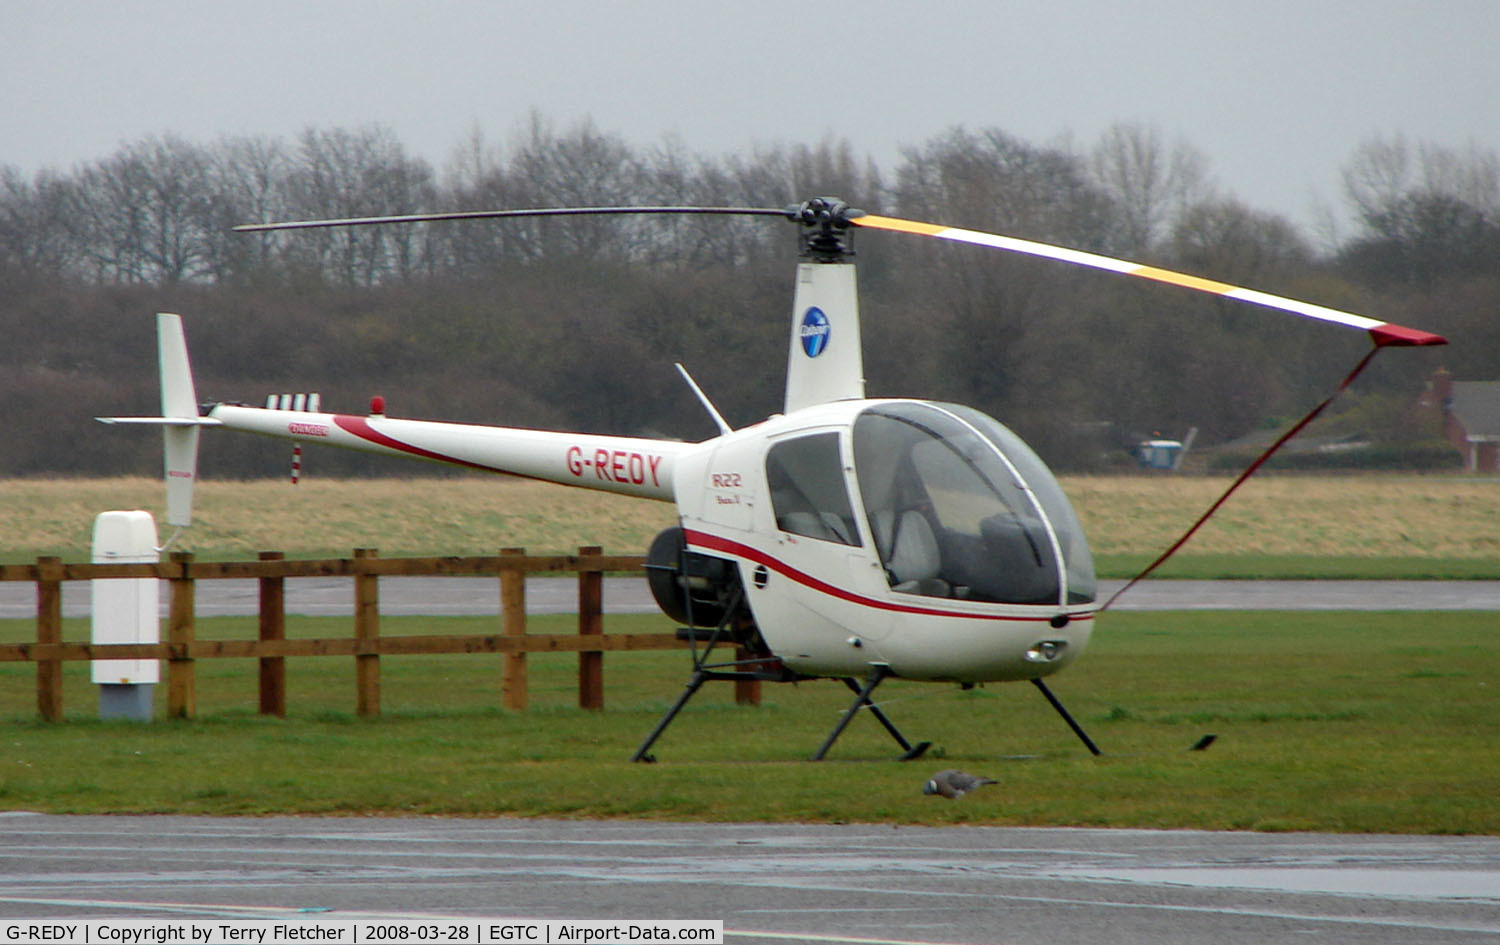 G-REDY, 2002 Robinson R22 Beta C/N 3402, Part of the General Aviation activity at Cranfield